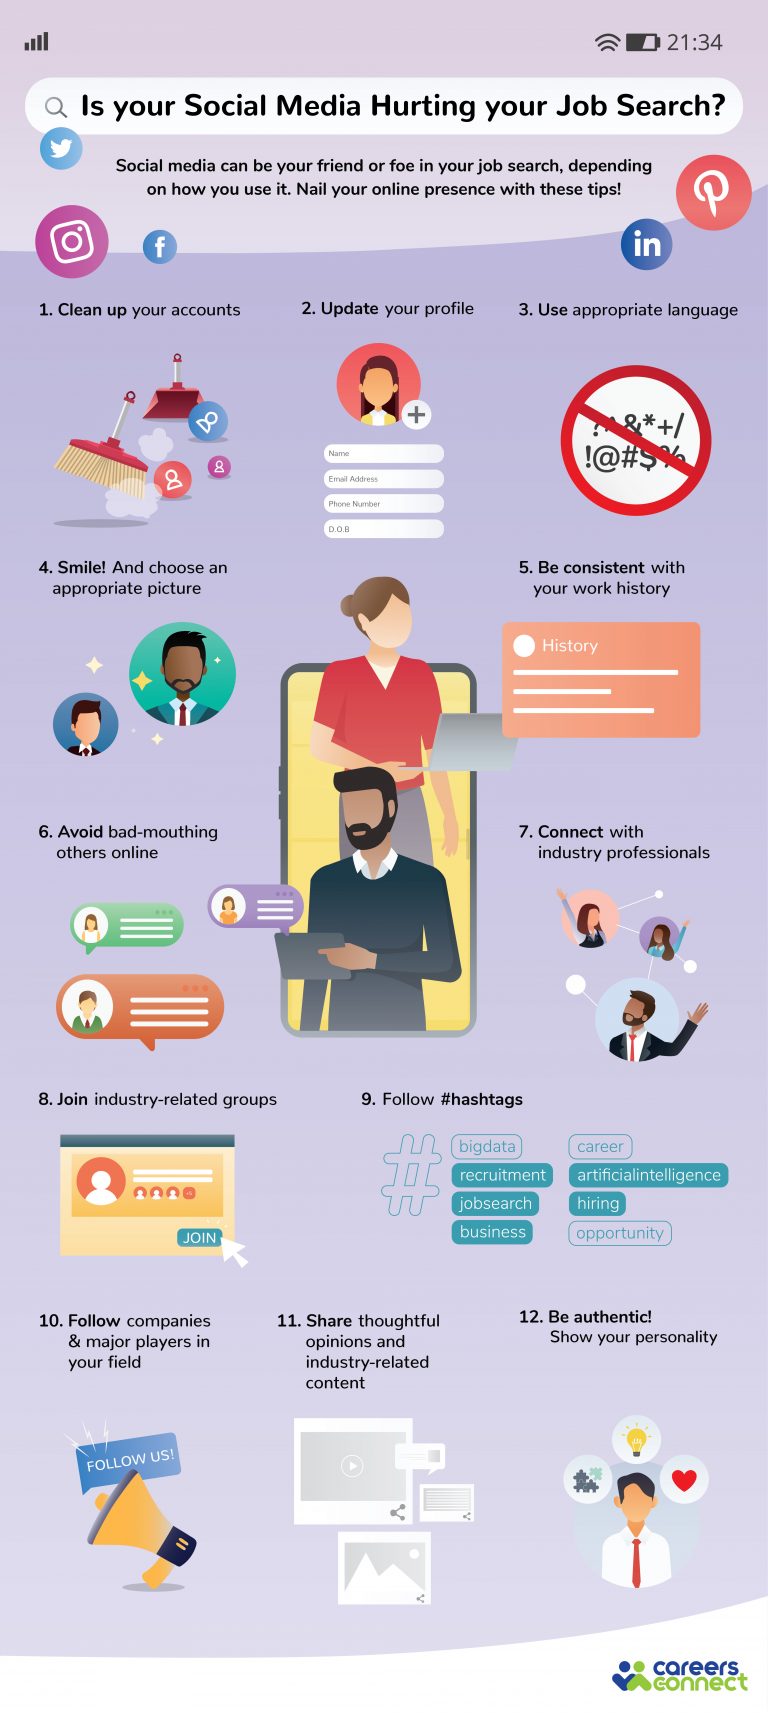 5 social media tips for job seekers to know